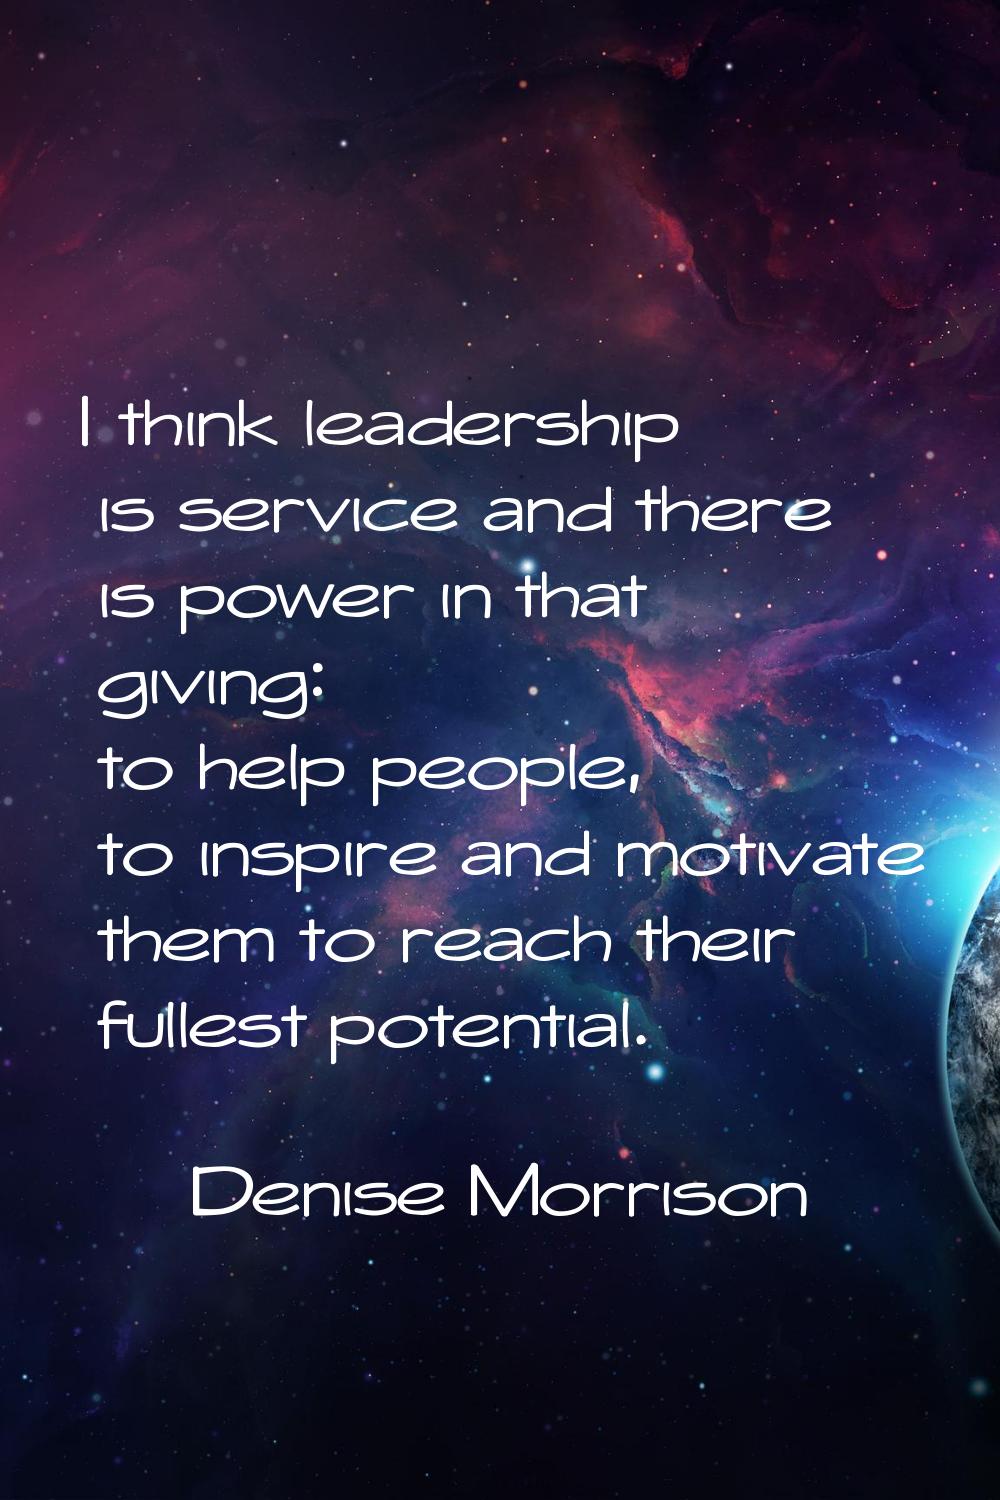 I think leadership is service and there is power in that giving: to help people, to inspire and mot